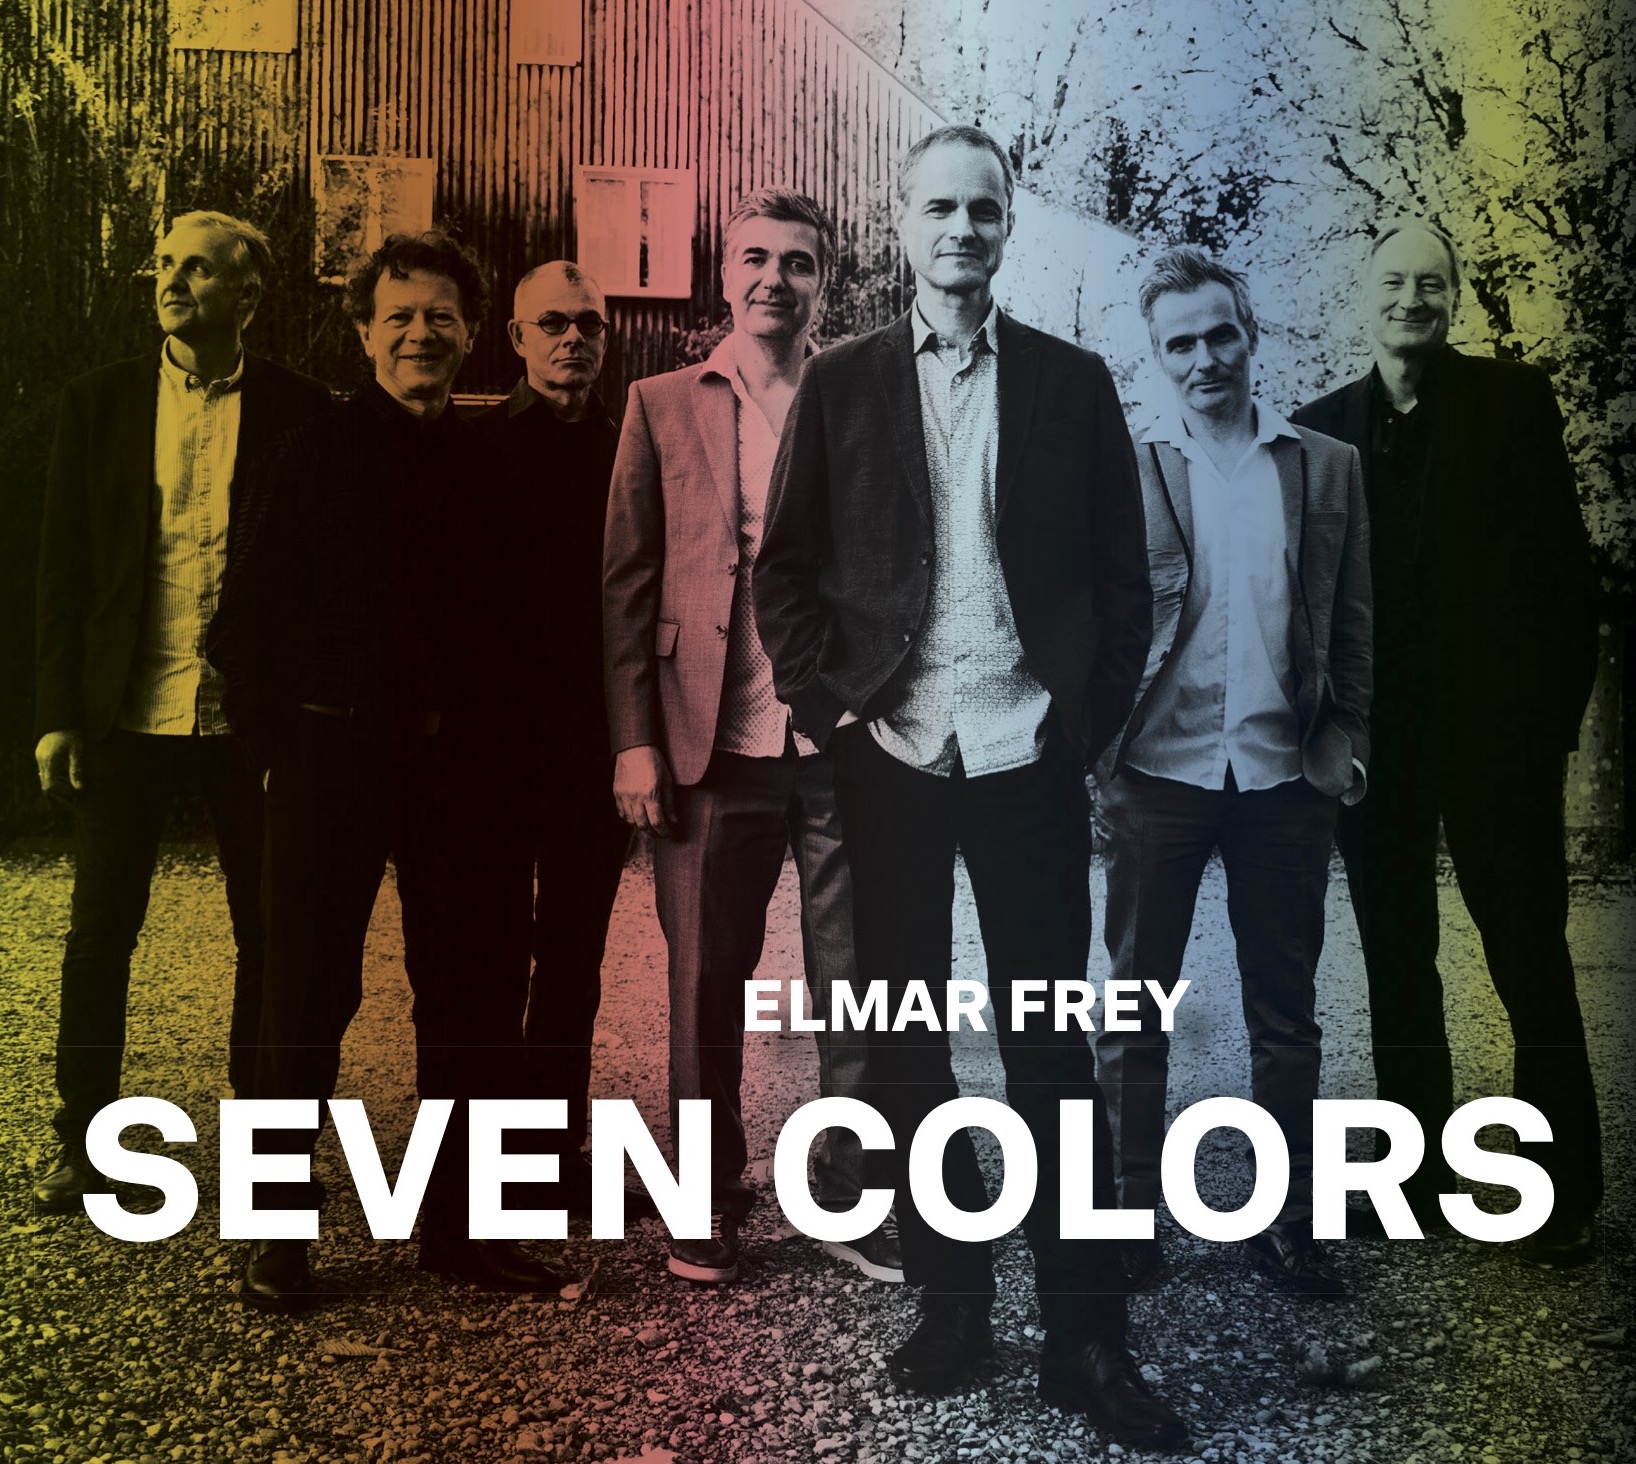 ‘Seven Colors’: Where Swiss Precision Meets Jazz Passion in Post-Bop's New Chapter